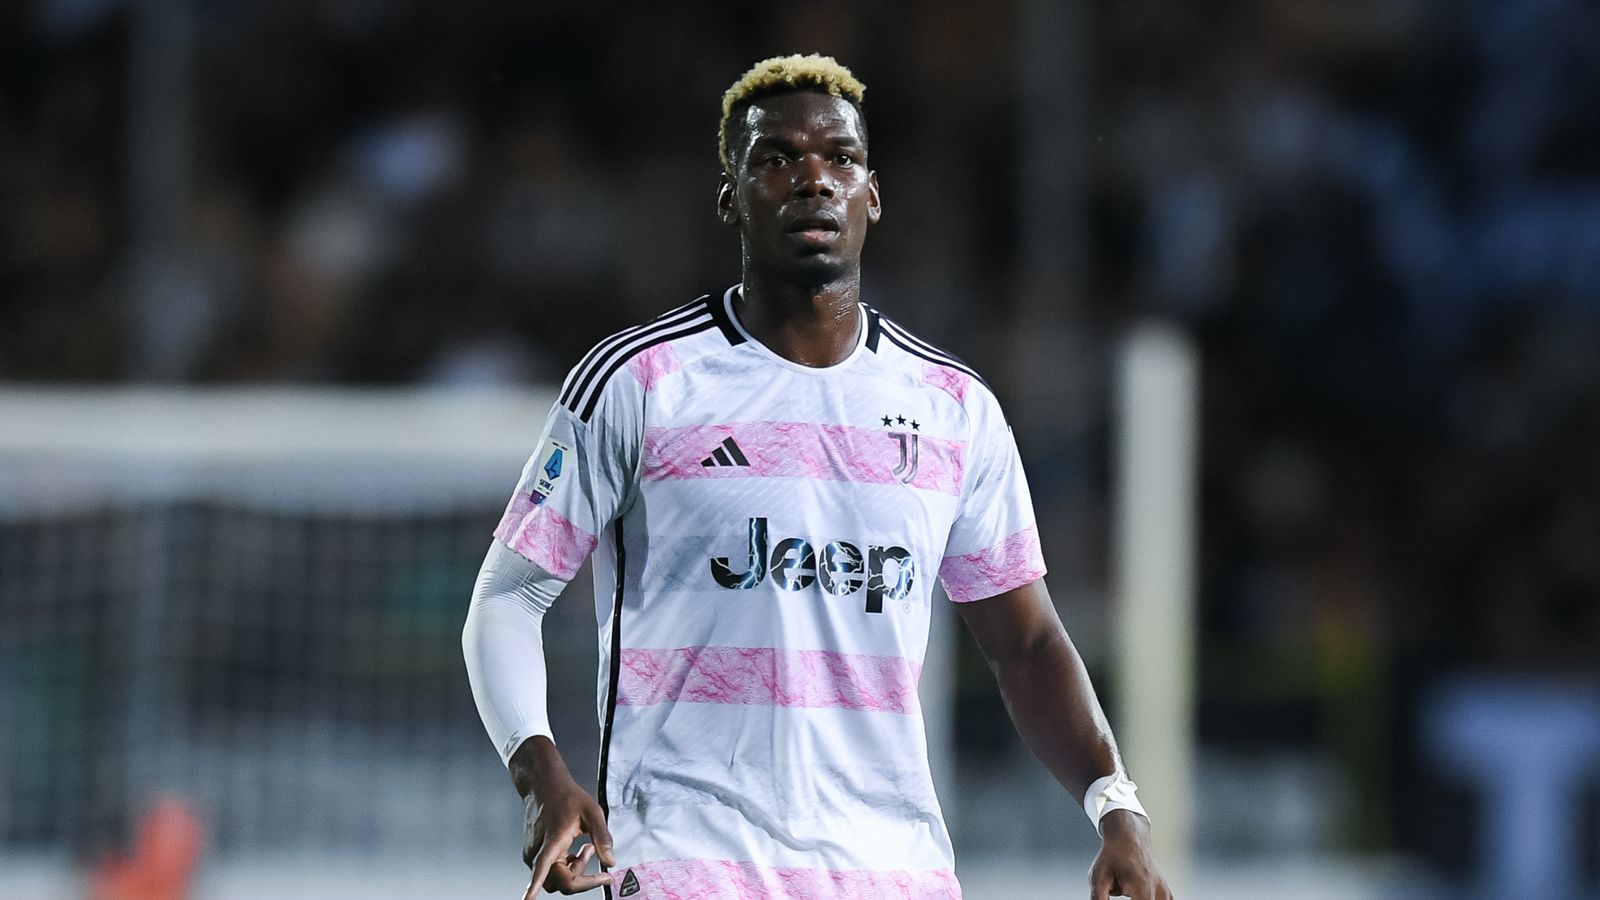 Juventus midfielder Paul Pogba tests positive again in counter-analysis tests